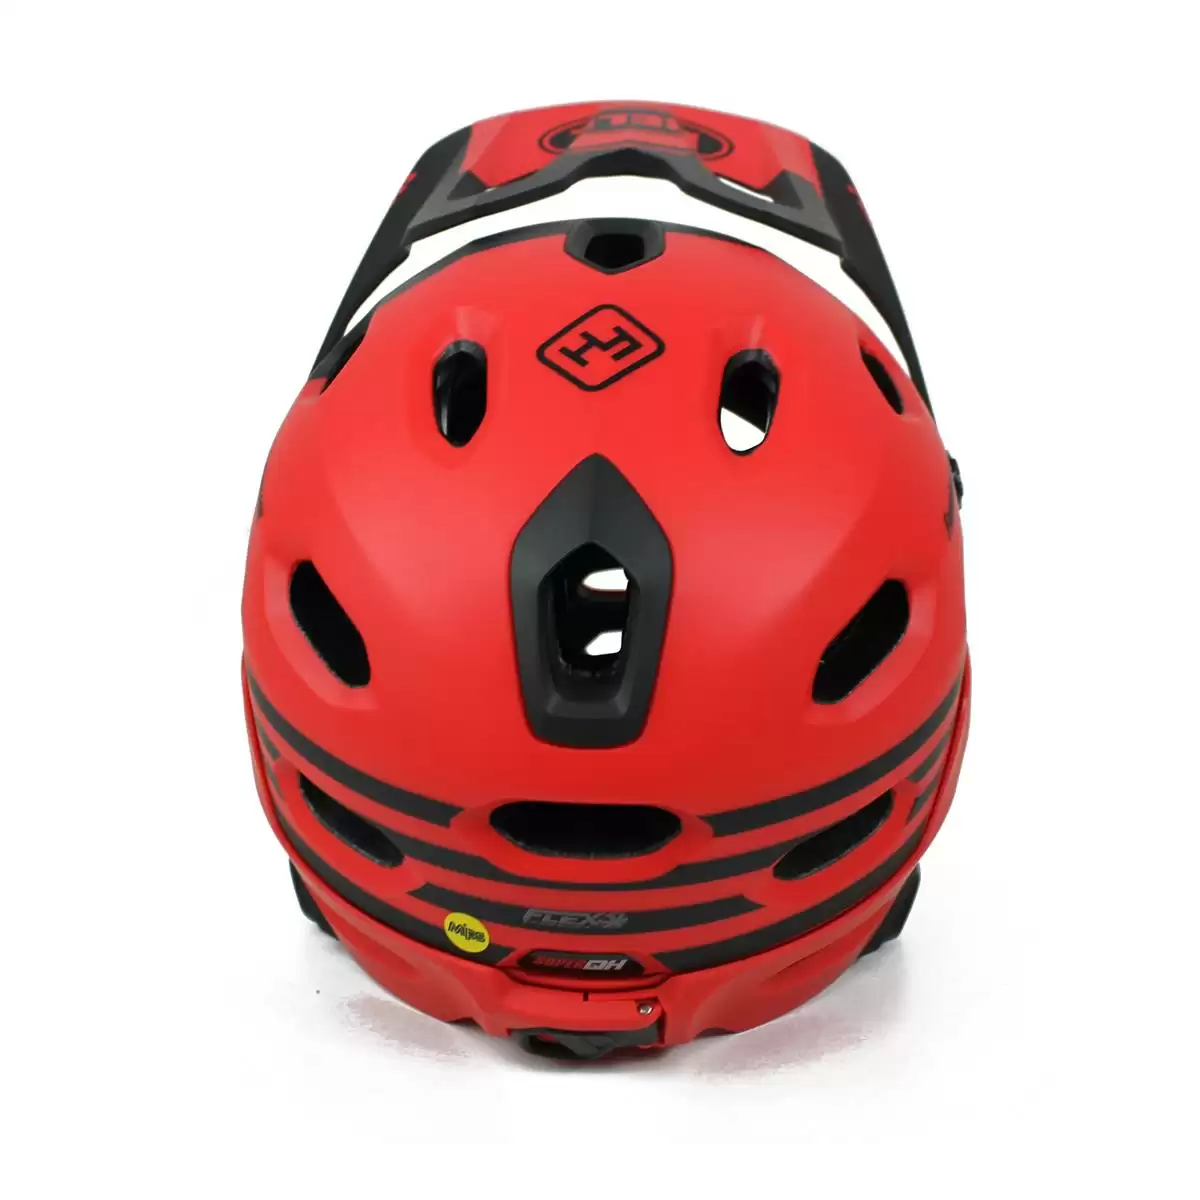 Helmet Super DH MIPS Fasthouse Red Size M (55-59cm) #6